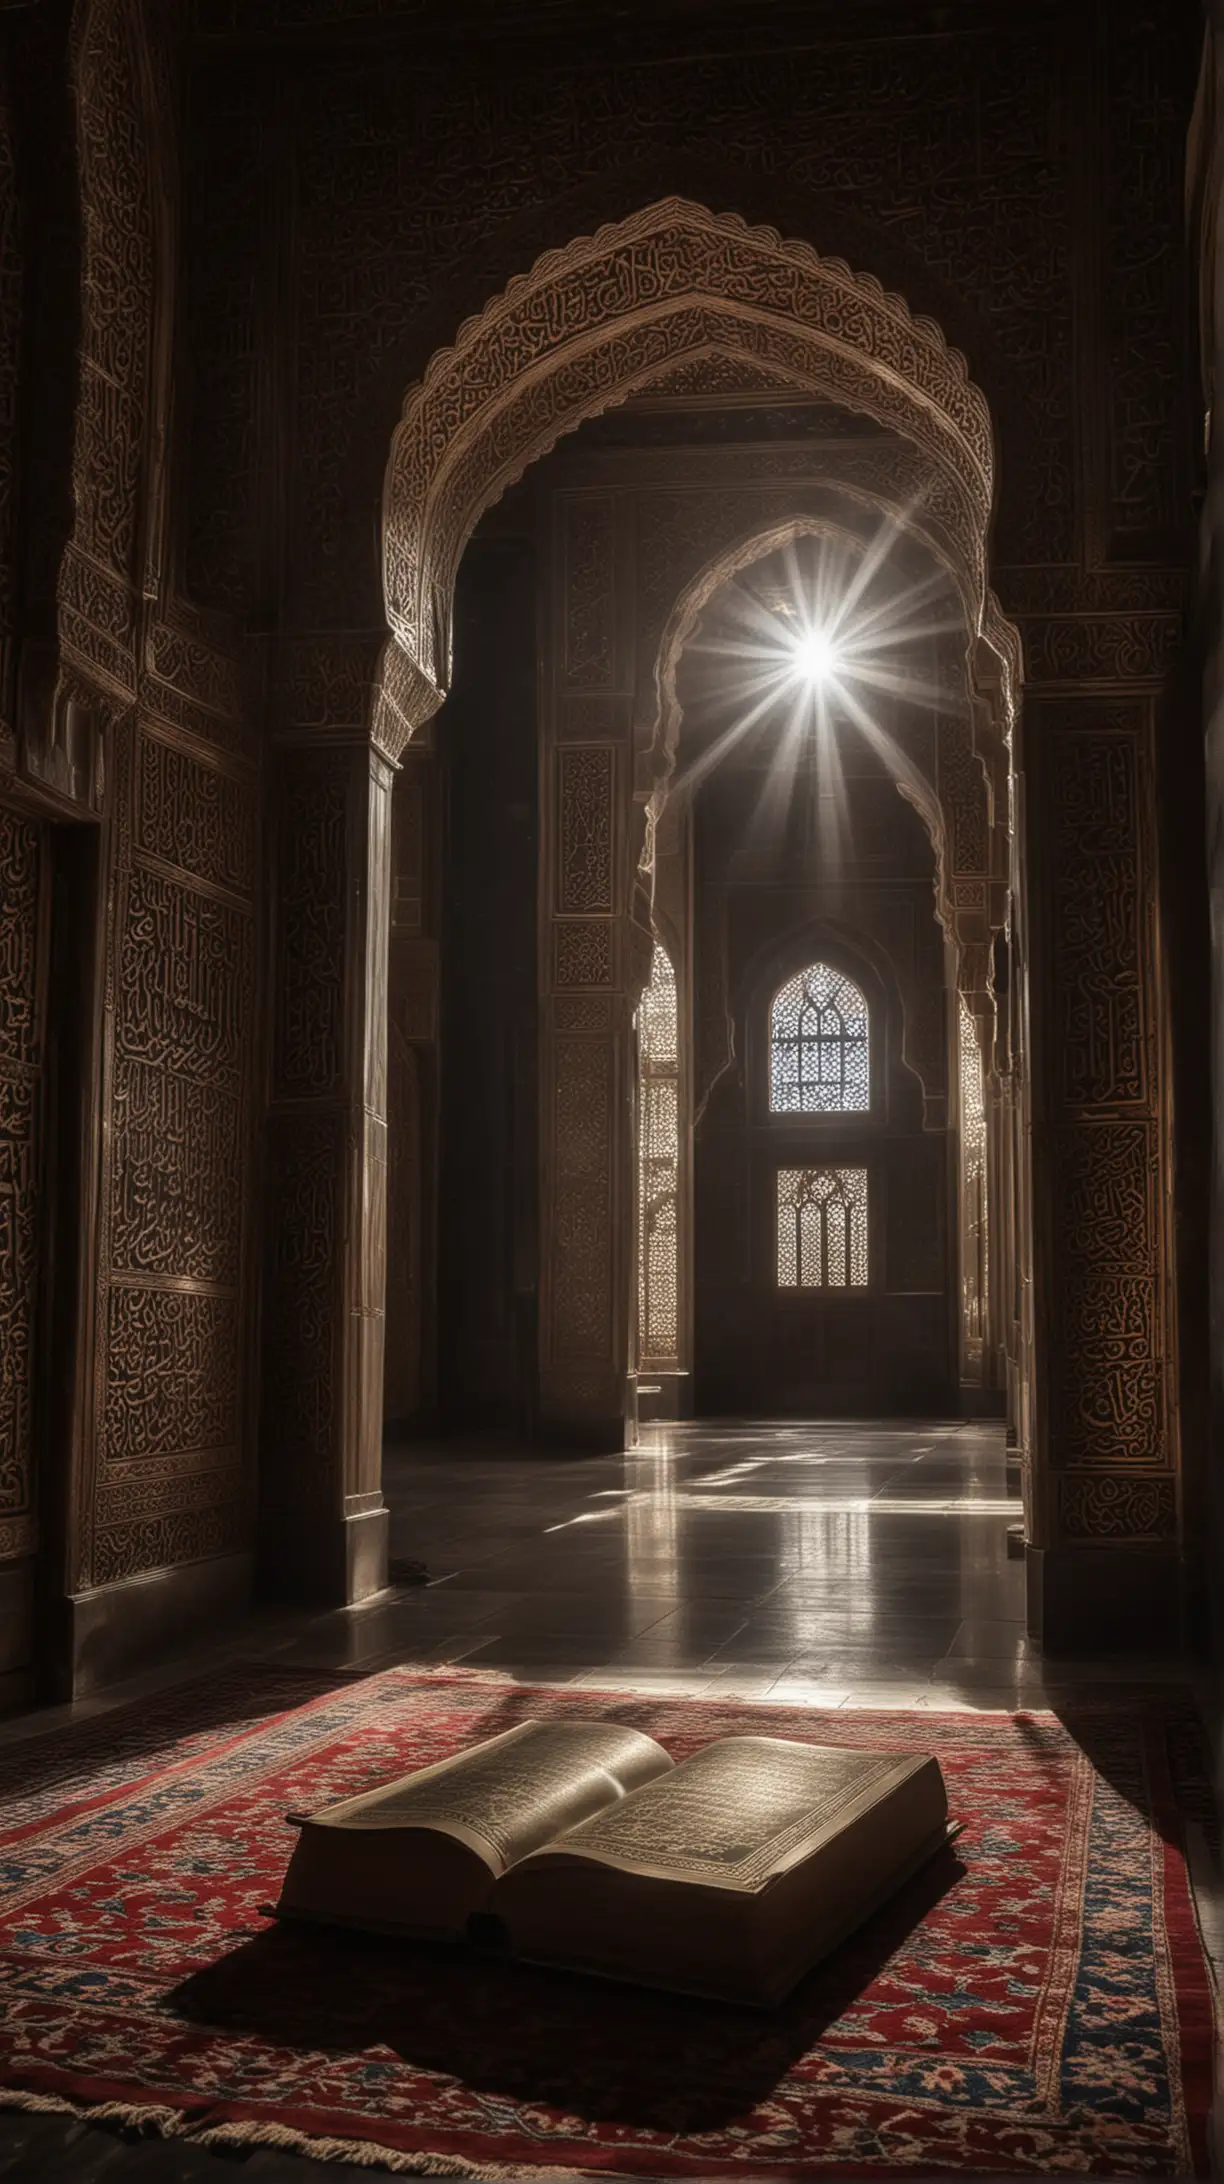 a shining book in a mosque with dark surrounding